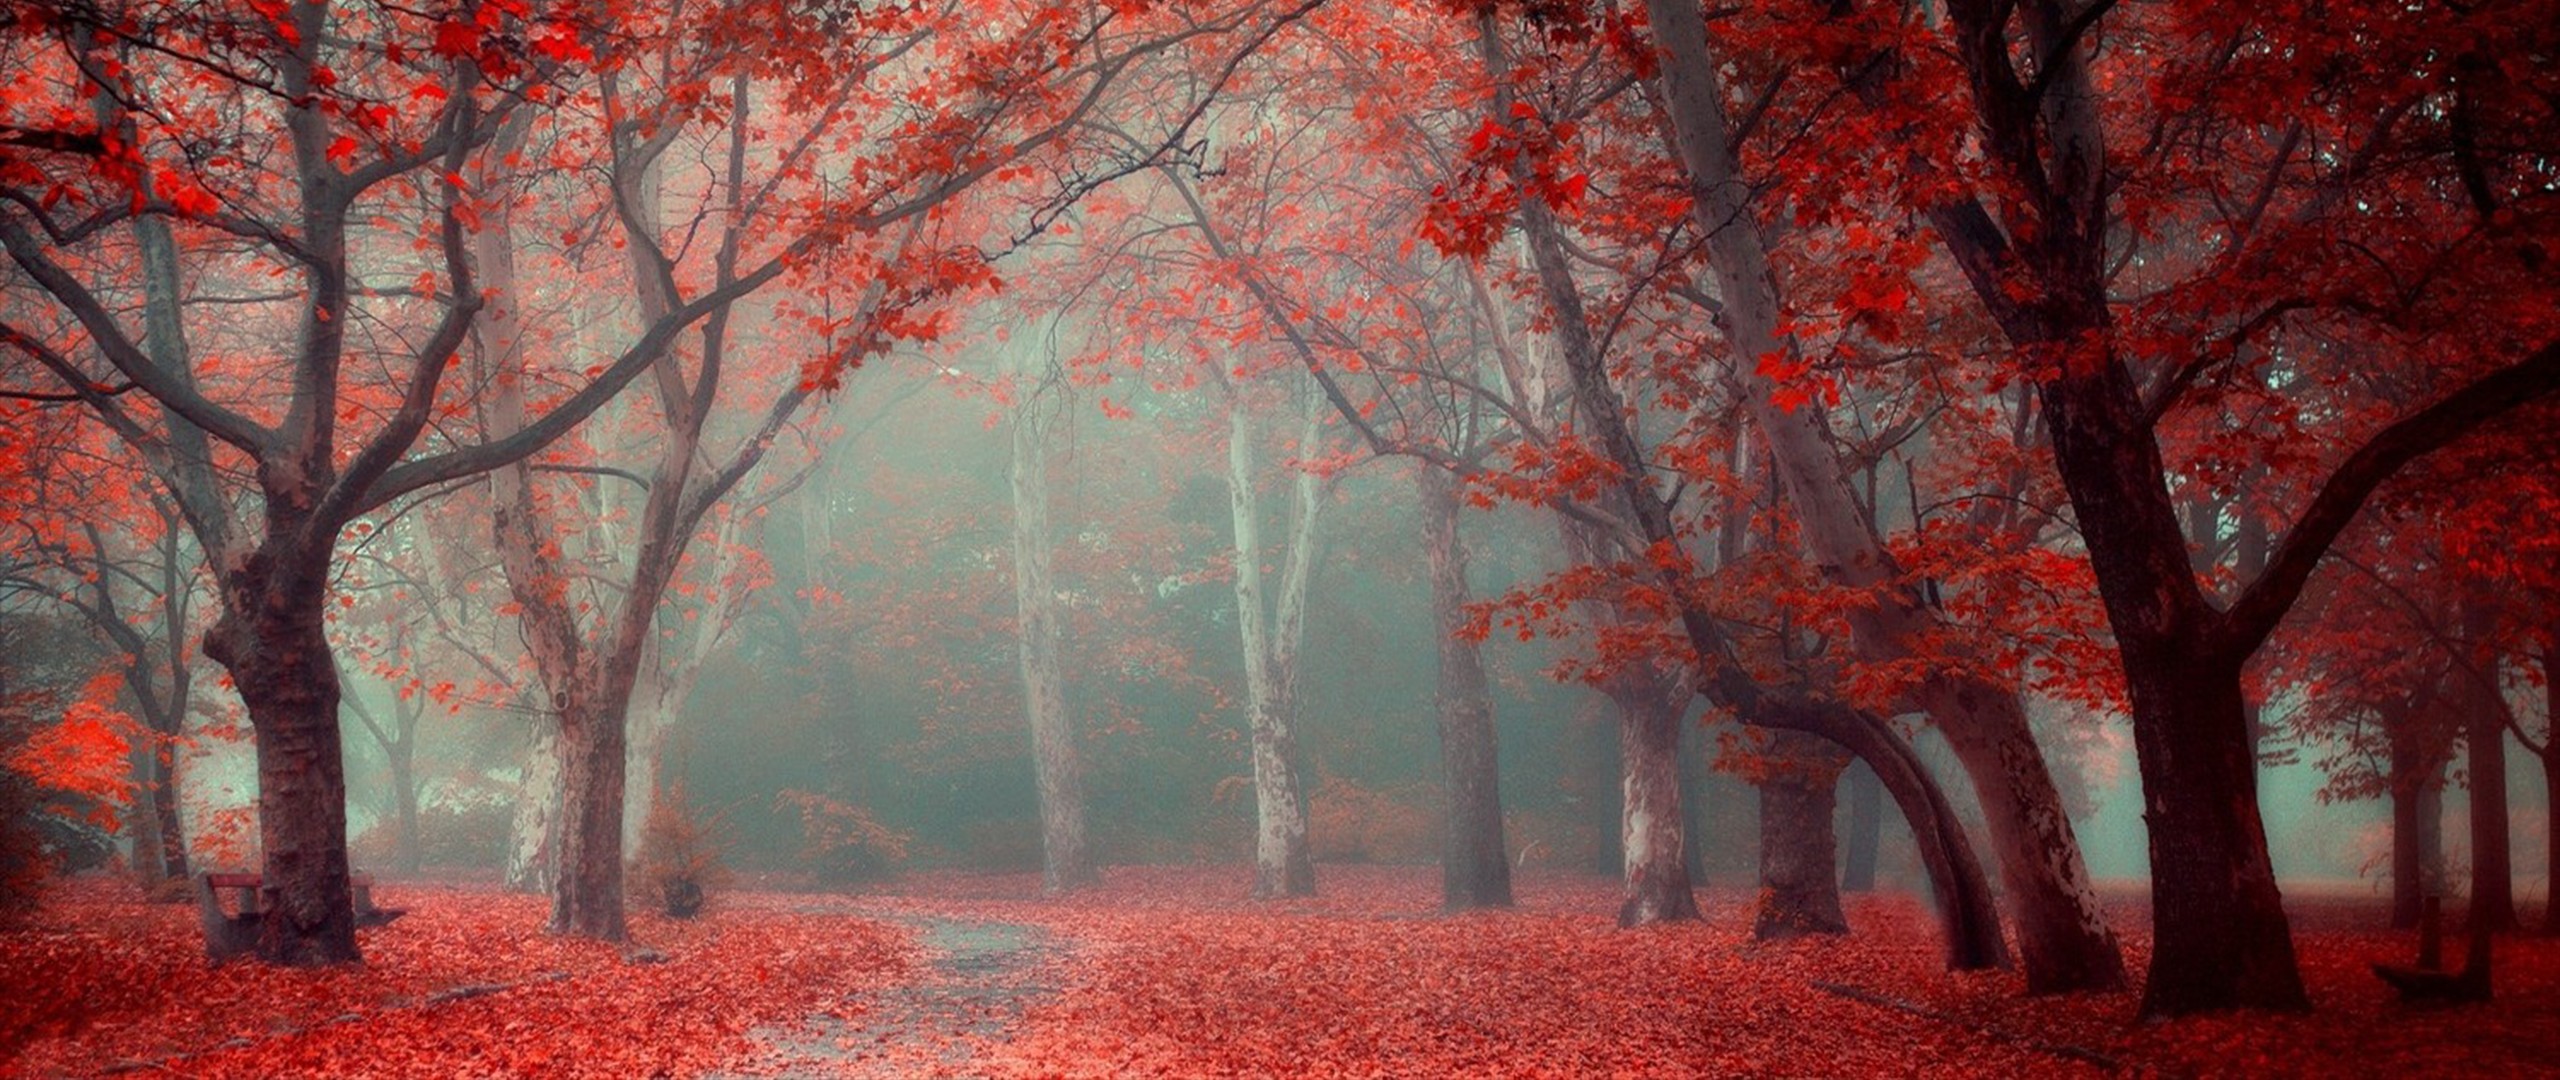 Nature with red foliage